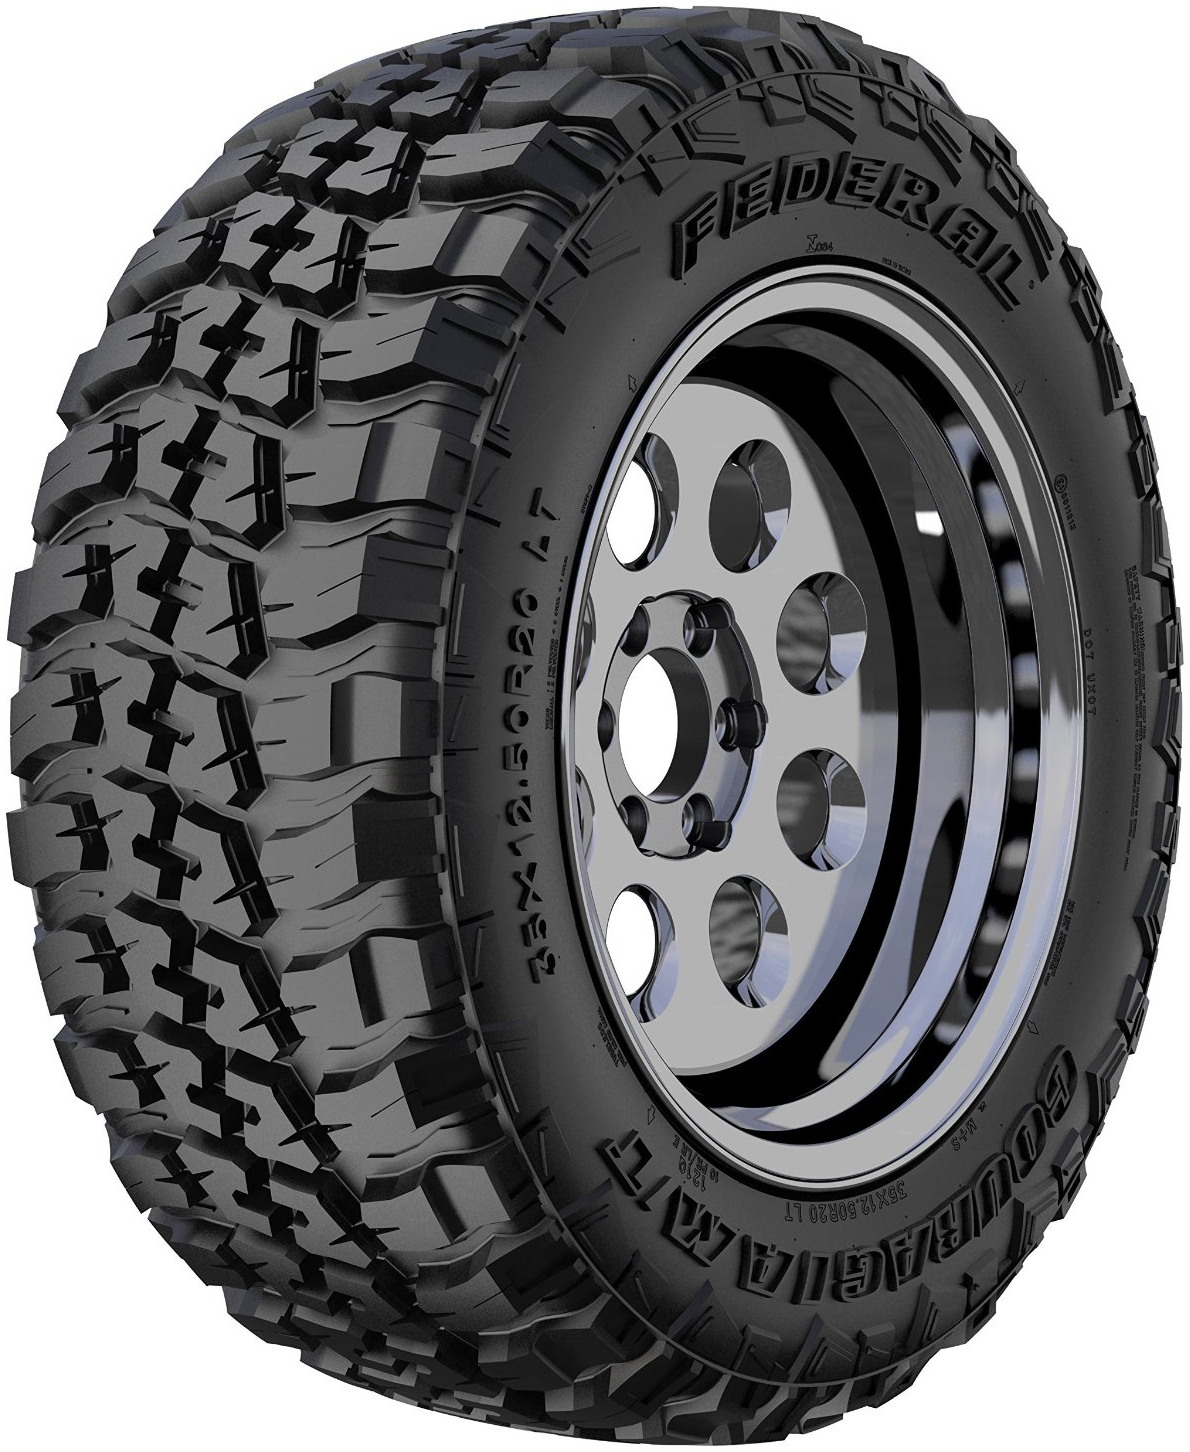 Anvelope jeep FEDERAL COURAGIA M/T 235/85 R16 120Q